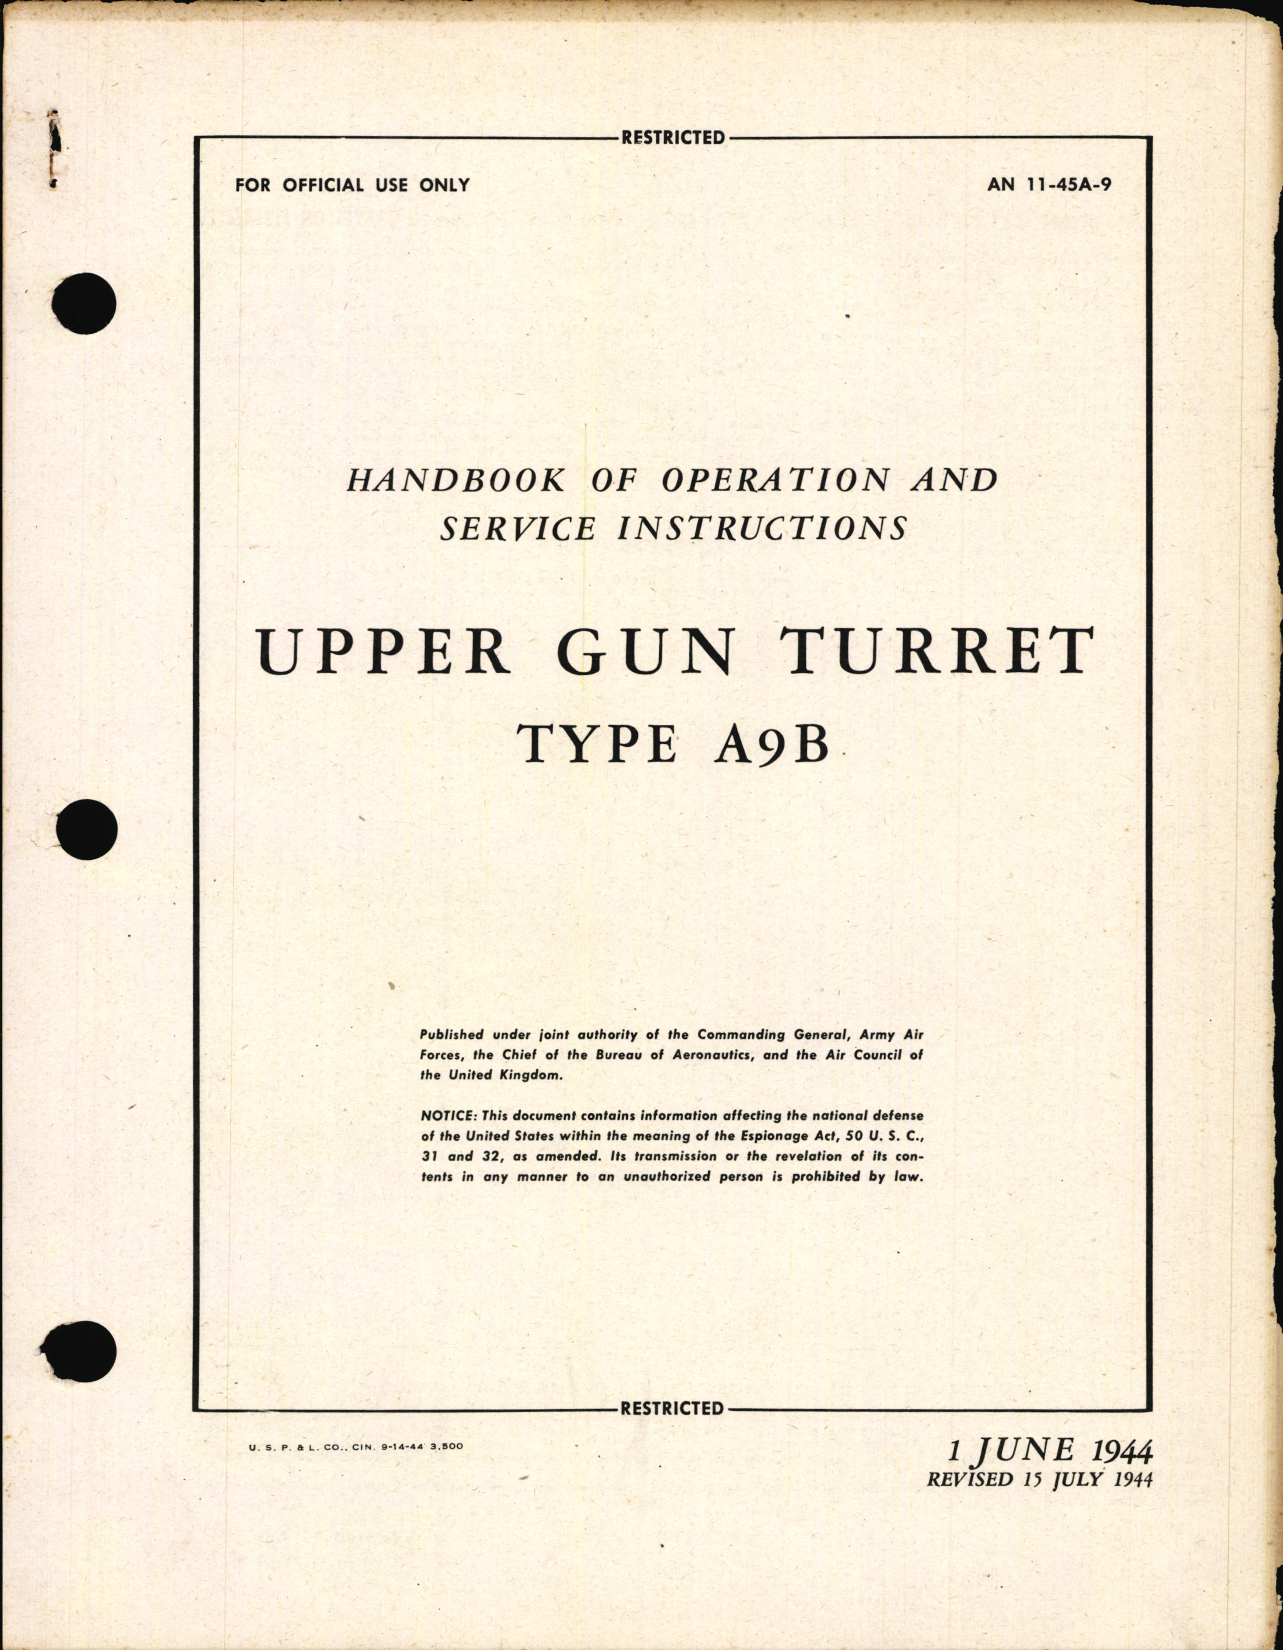 Sample page 1 from AirCorps Library document: Operation and Service Instructions for Upper Gun Turret Type A9B